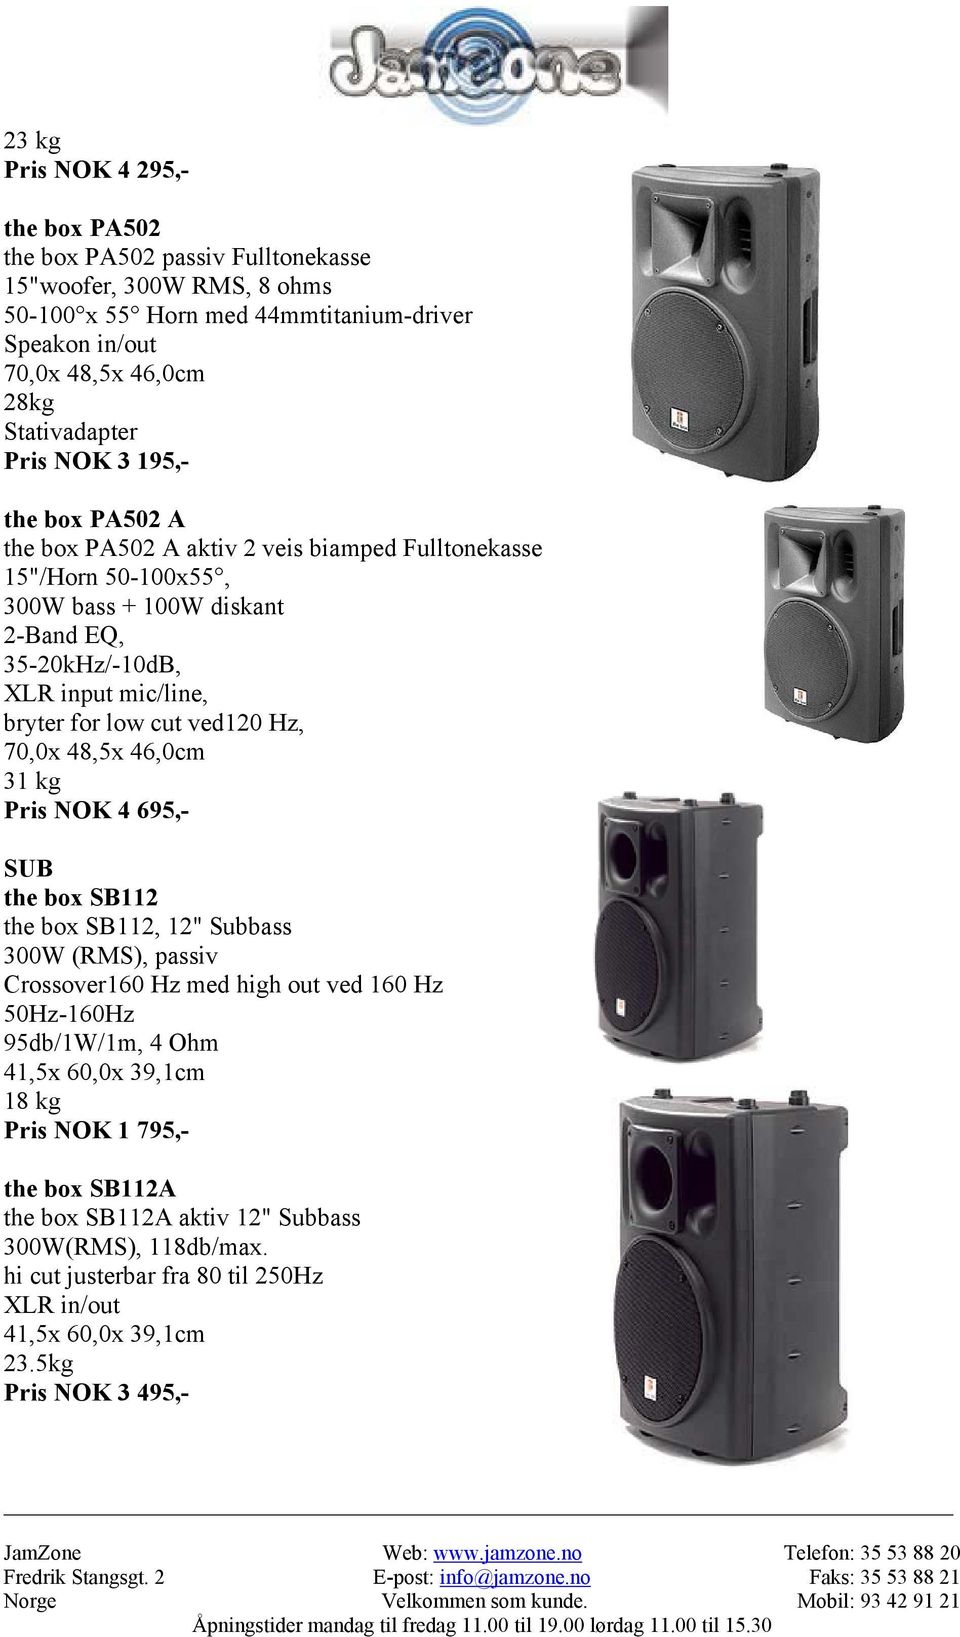 ved120 Hz, 70,0x 48,5x 46,0cm 31 kg Pris NOK 4 695,- SUB the box SB112 the box SB112, 12" Subbass 300W (RMS), passiv Crossover160 Hz med high out ved 160 Hz 50Hz-160Hz 95db/1W/1m, 4 Ohm